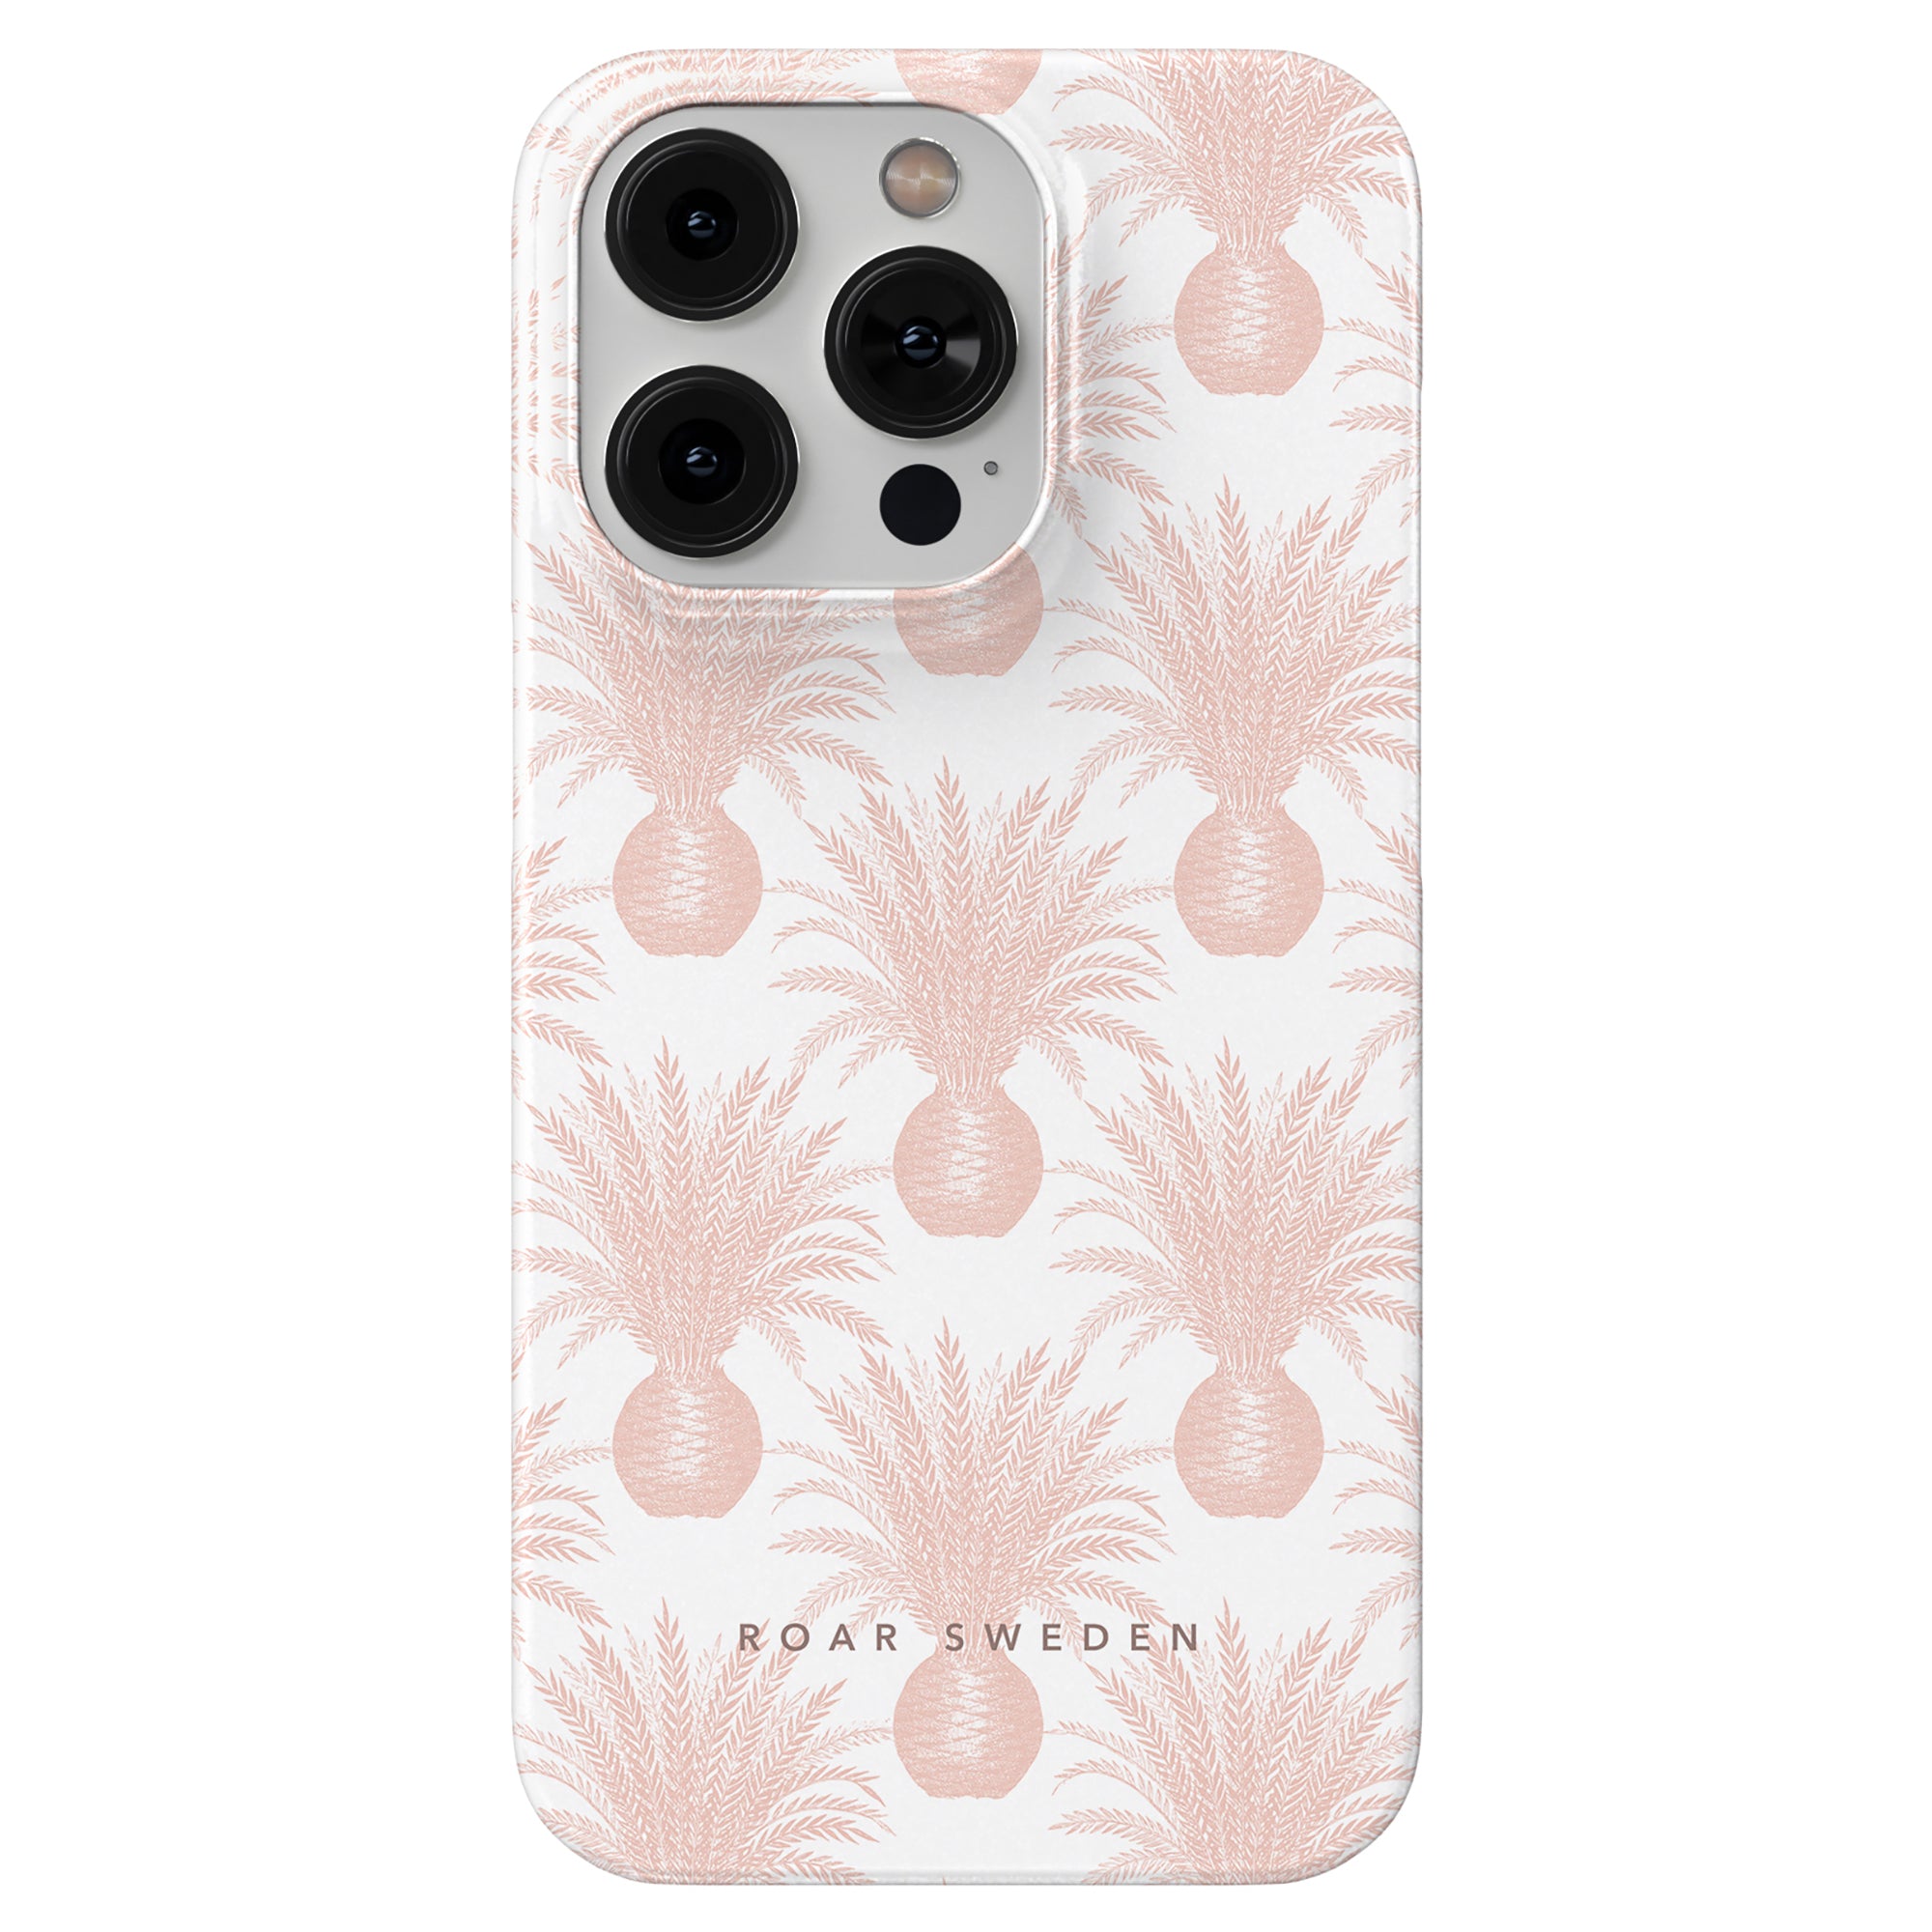 White smartphone with a Pink Pineapple - Slim case, a triple-lens camera, and waterproof durability.